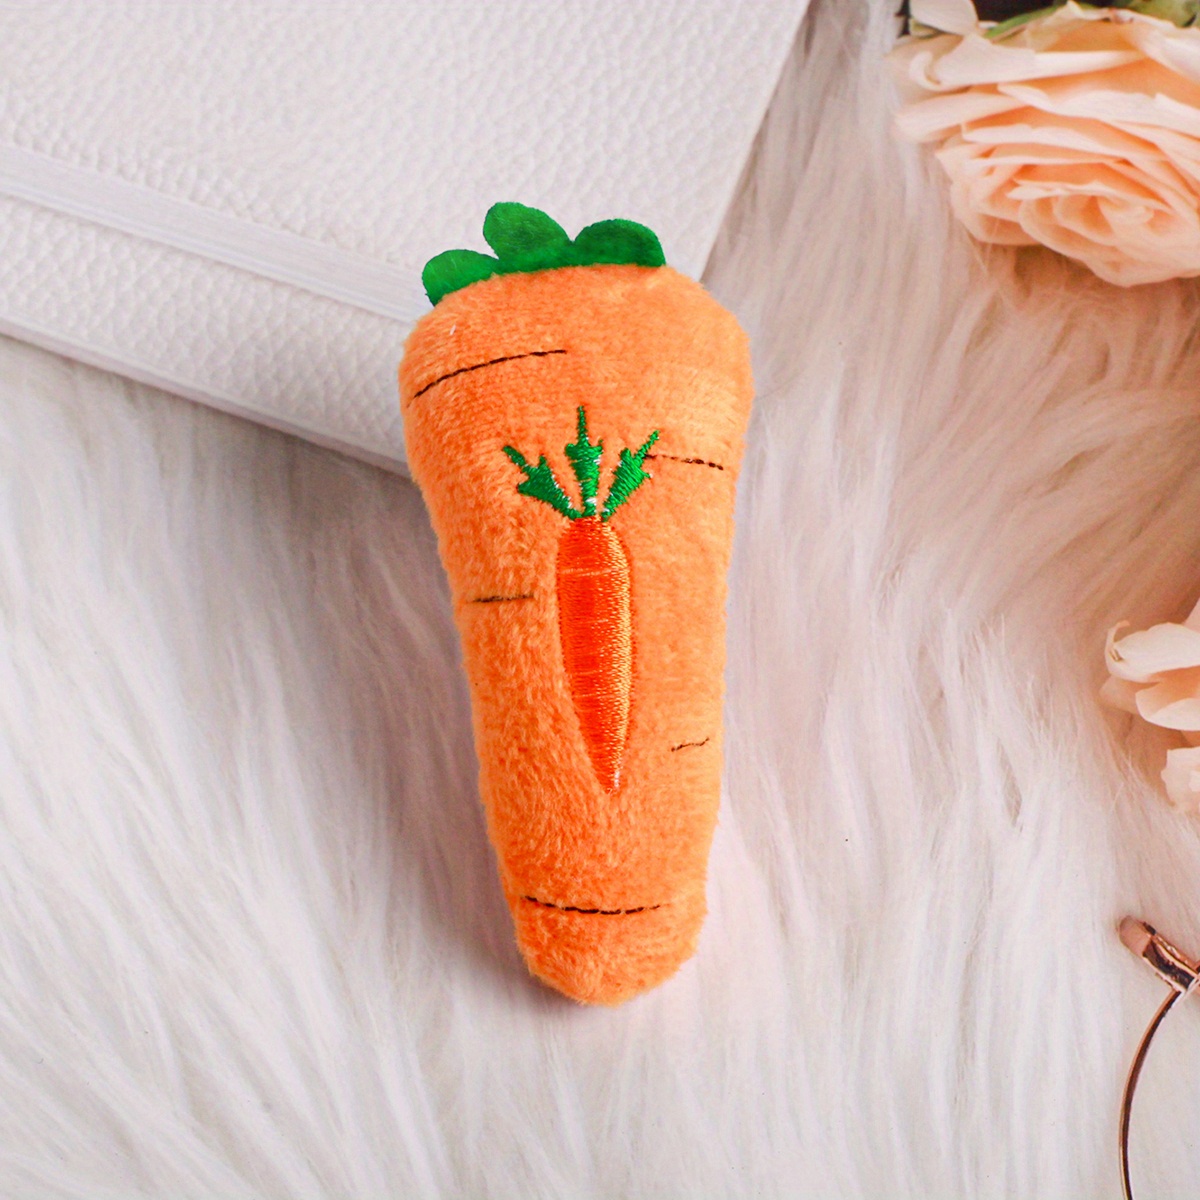 1pc Cute Orange Carrot Shaped Pet Plush Toy, Soft Soundable Durable Pet  Plush Toy For Cat, Dog For Playing